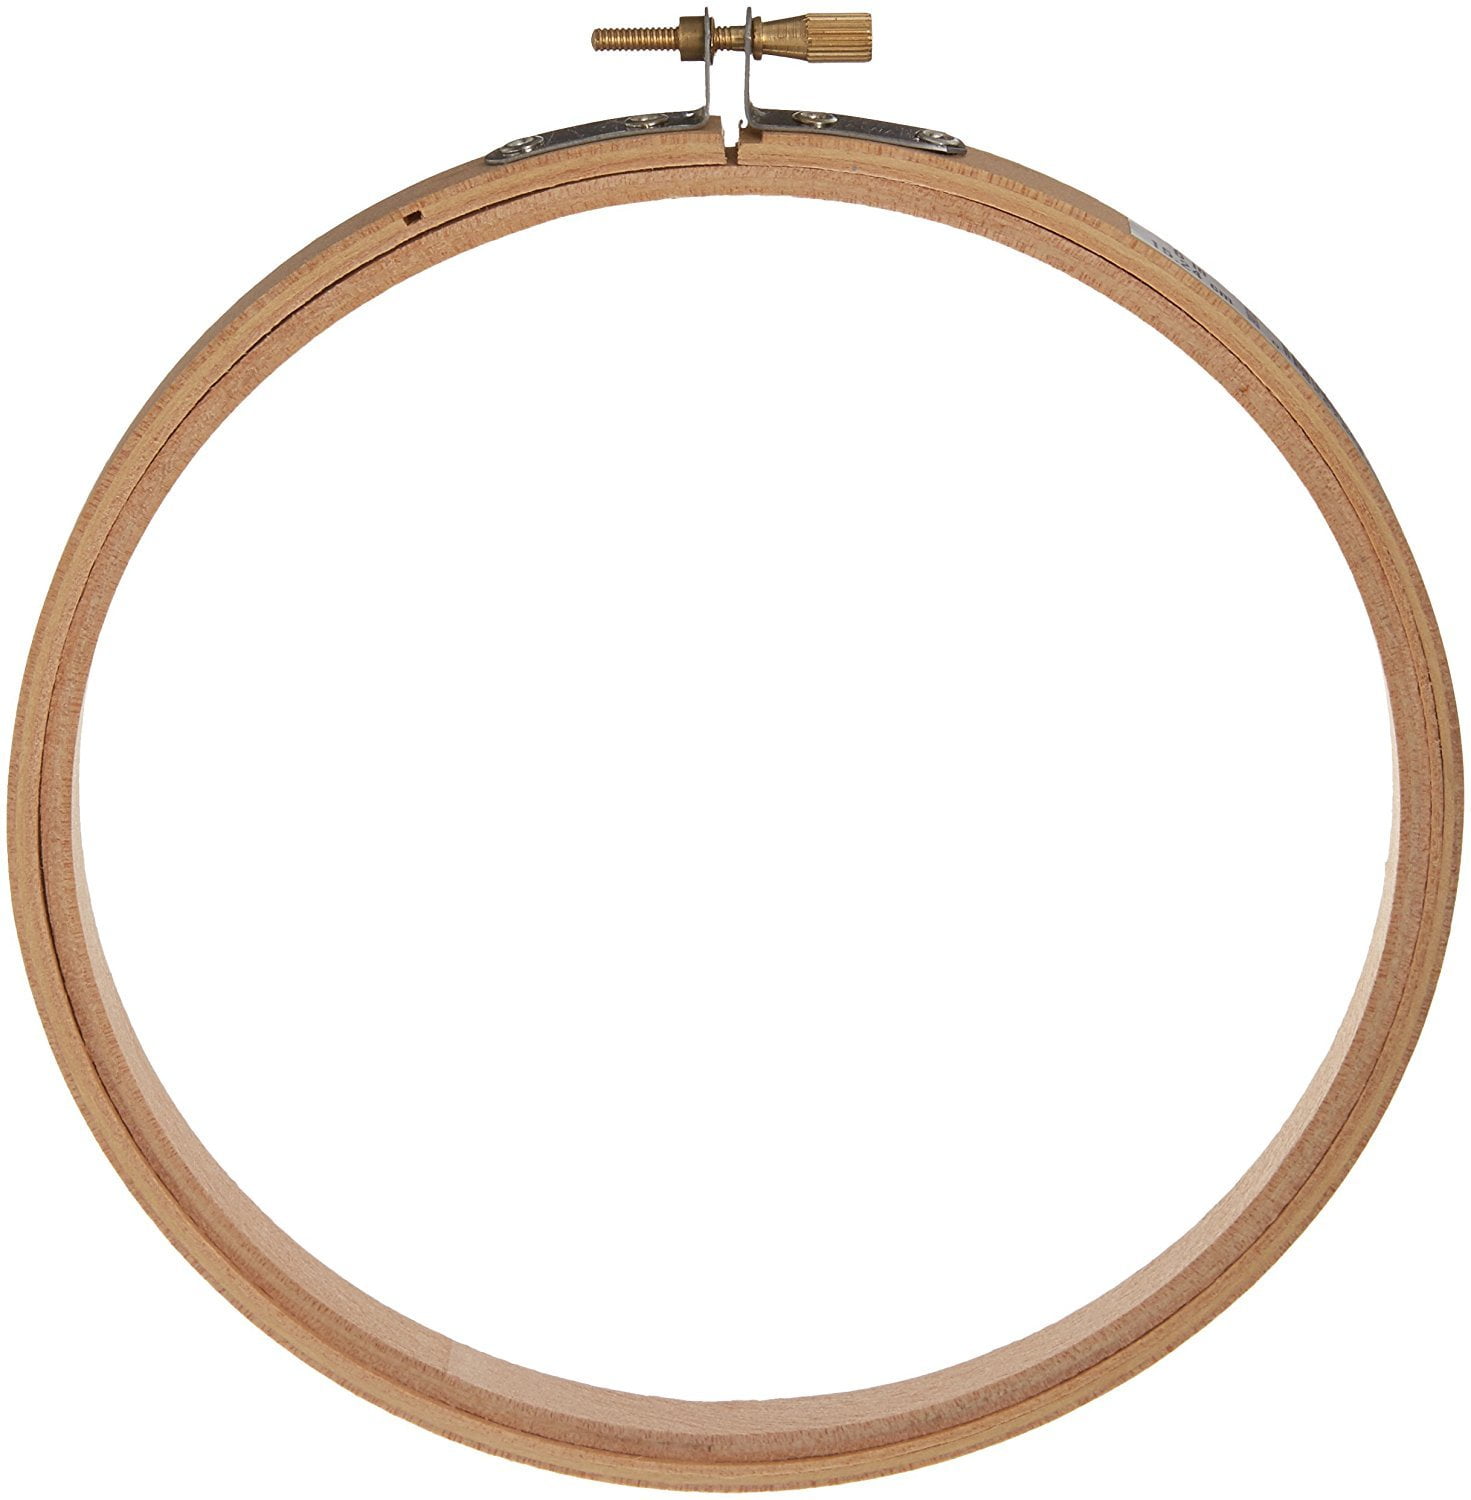 Anchor Faux Wood Round Embroidery Hoop 8